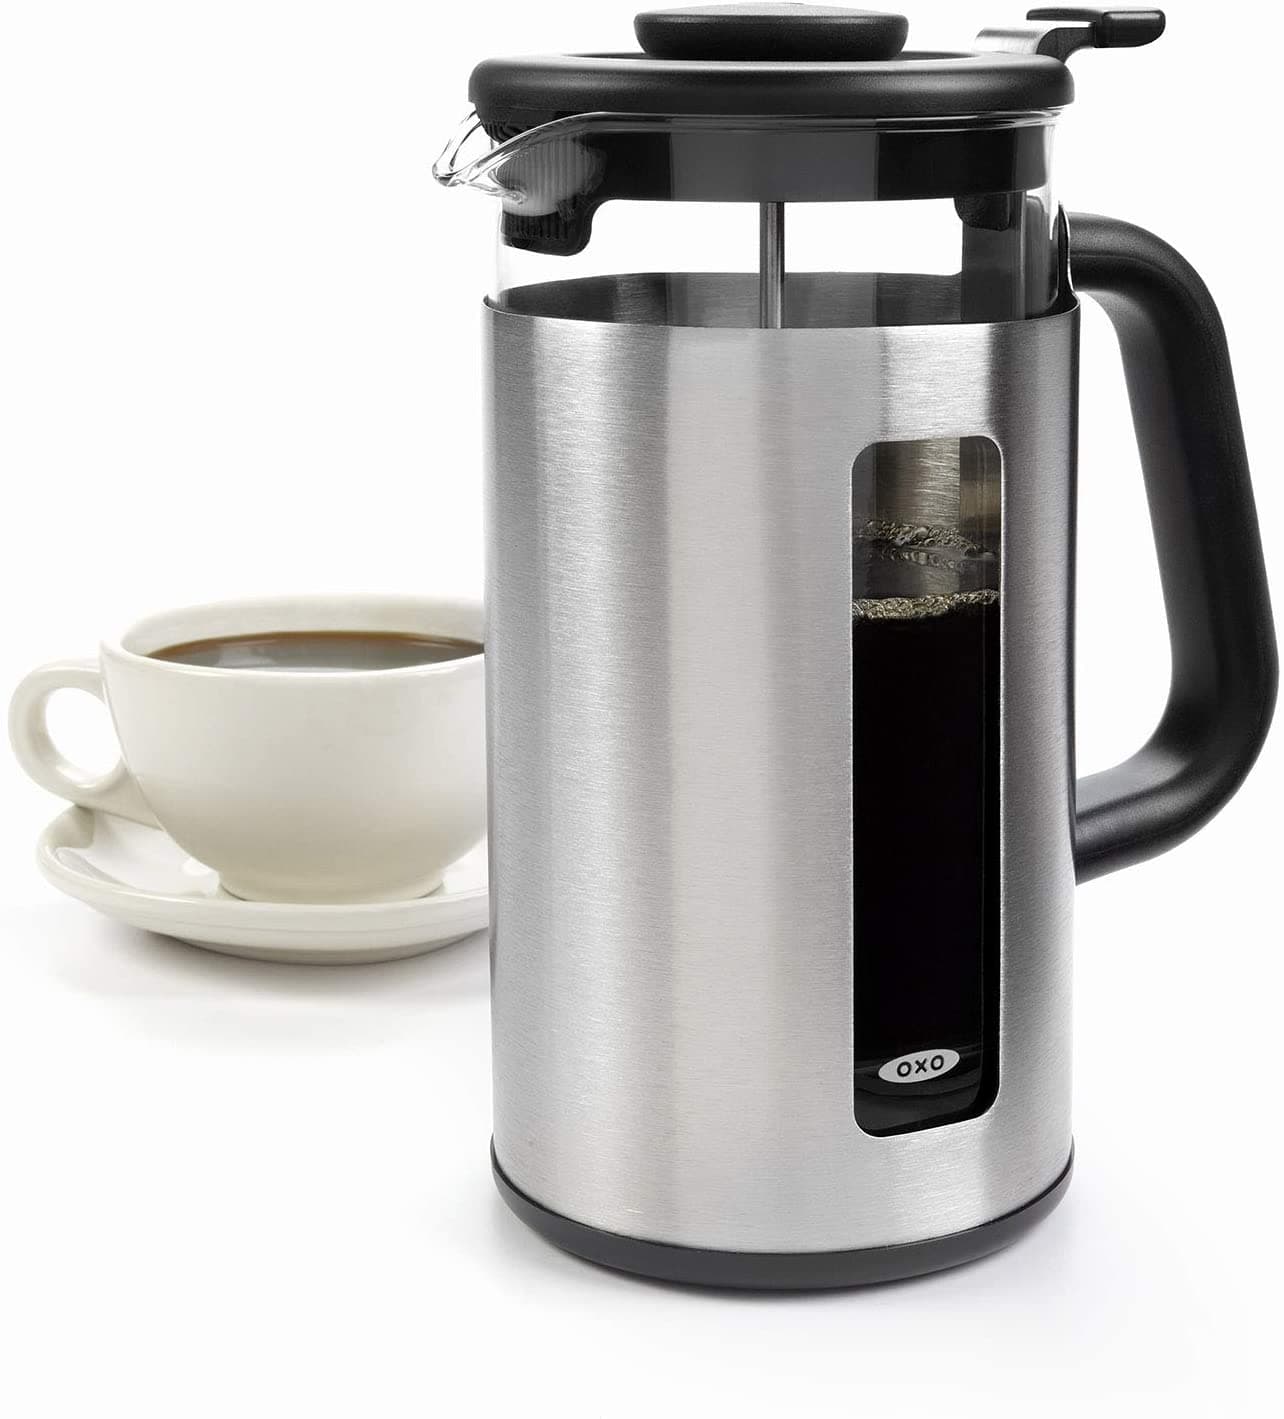 OXO 8-Cup Stainless Steel Brew Coffee Maker with Single-Serve